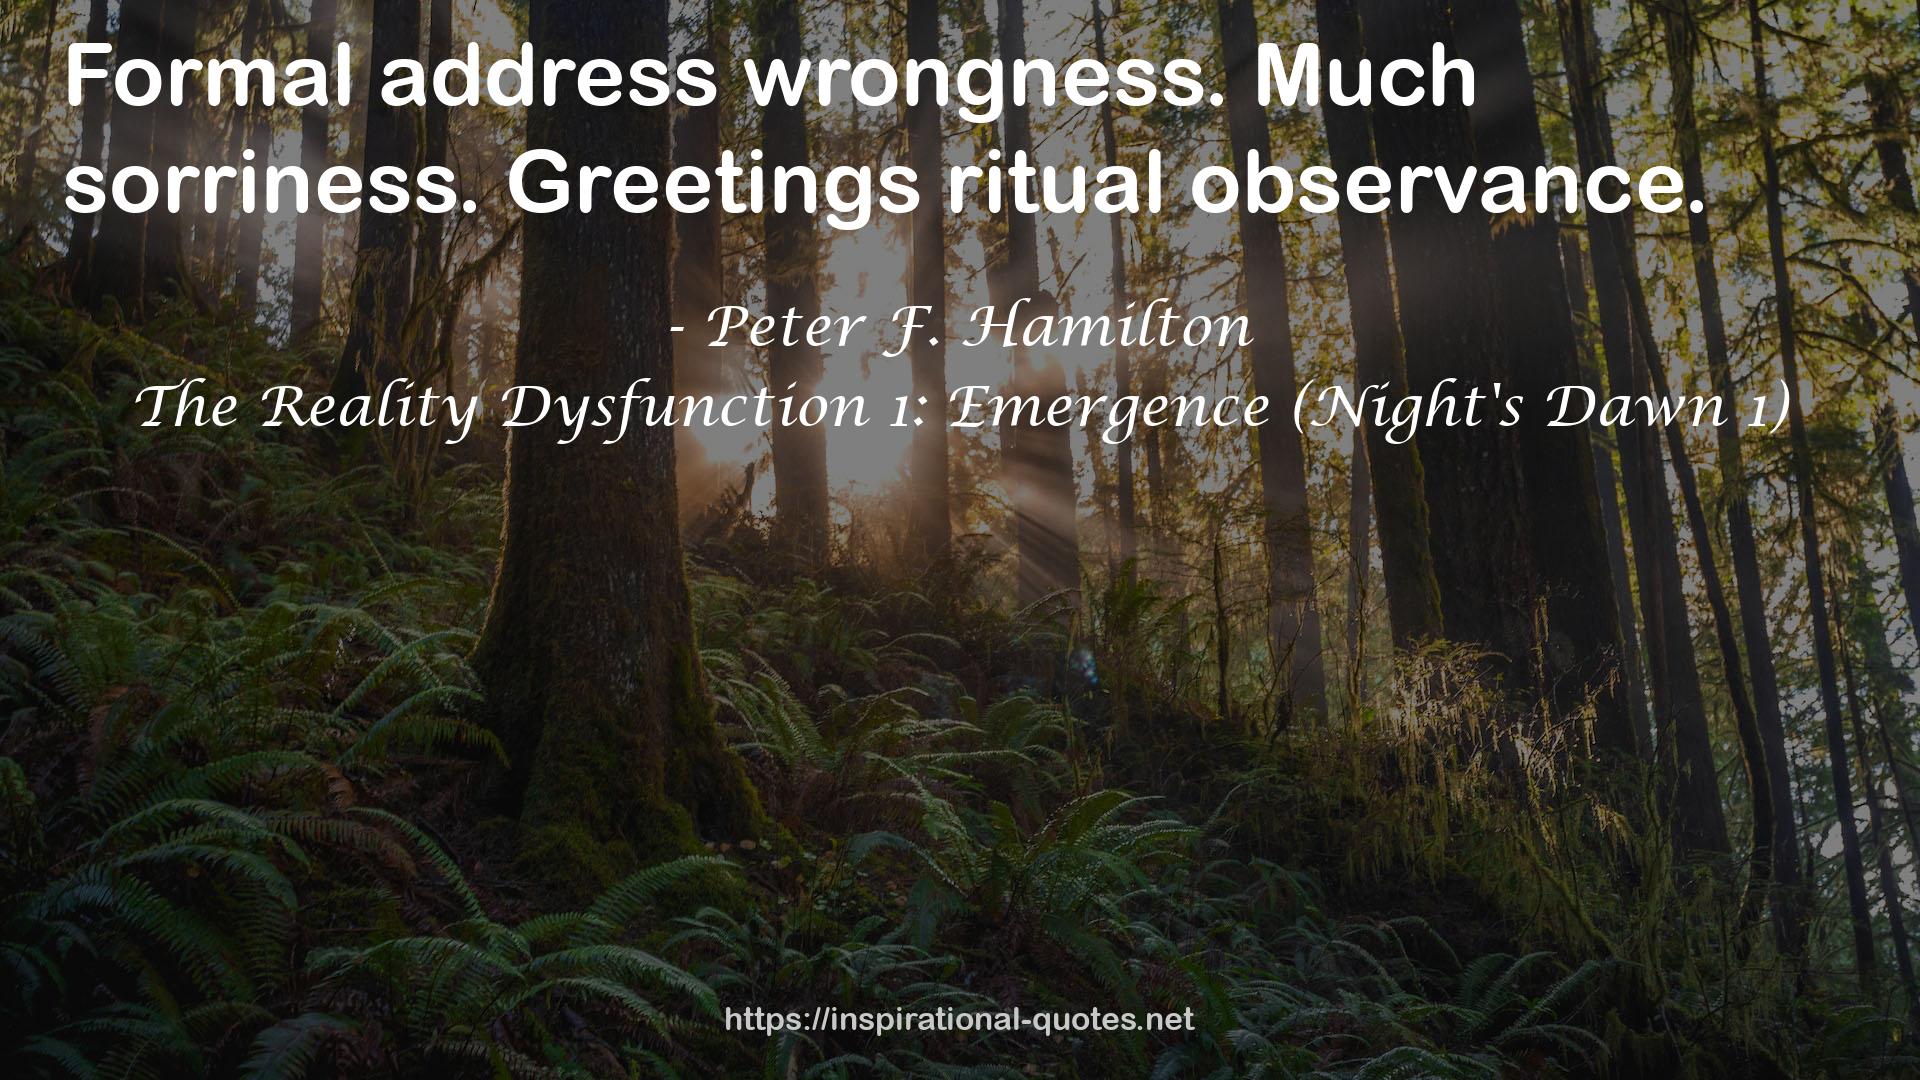 The Reality Dysfunction 1: Emergence (Night's Dawn 1) QUOTES